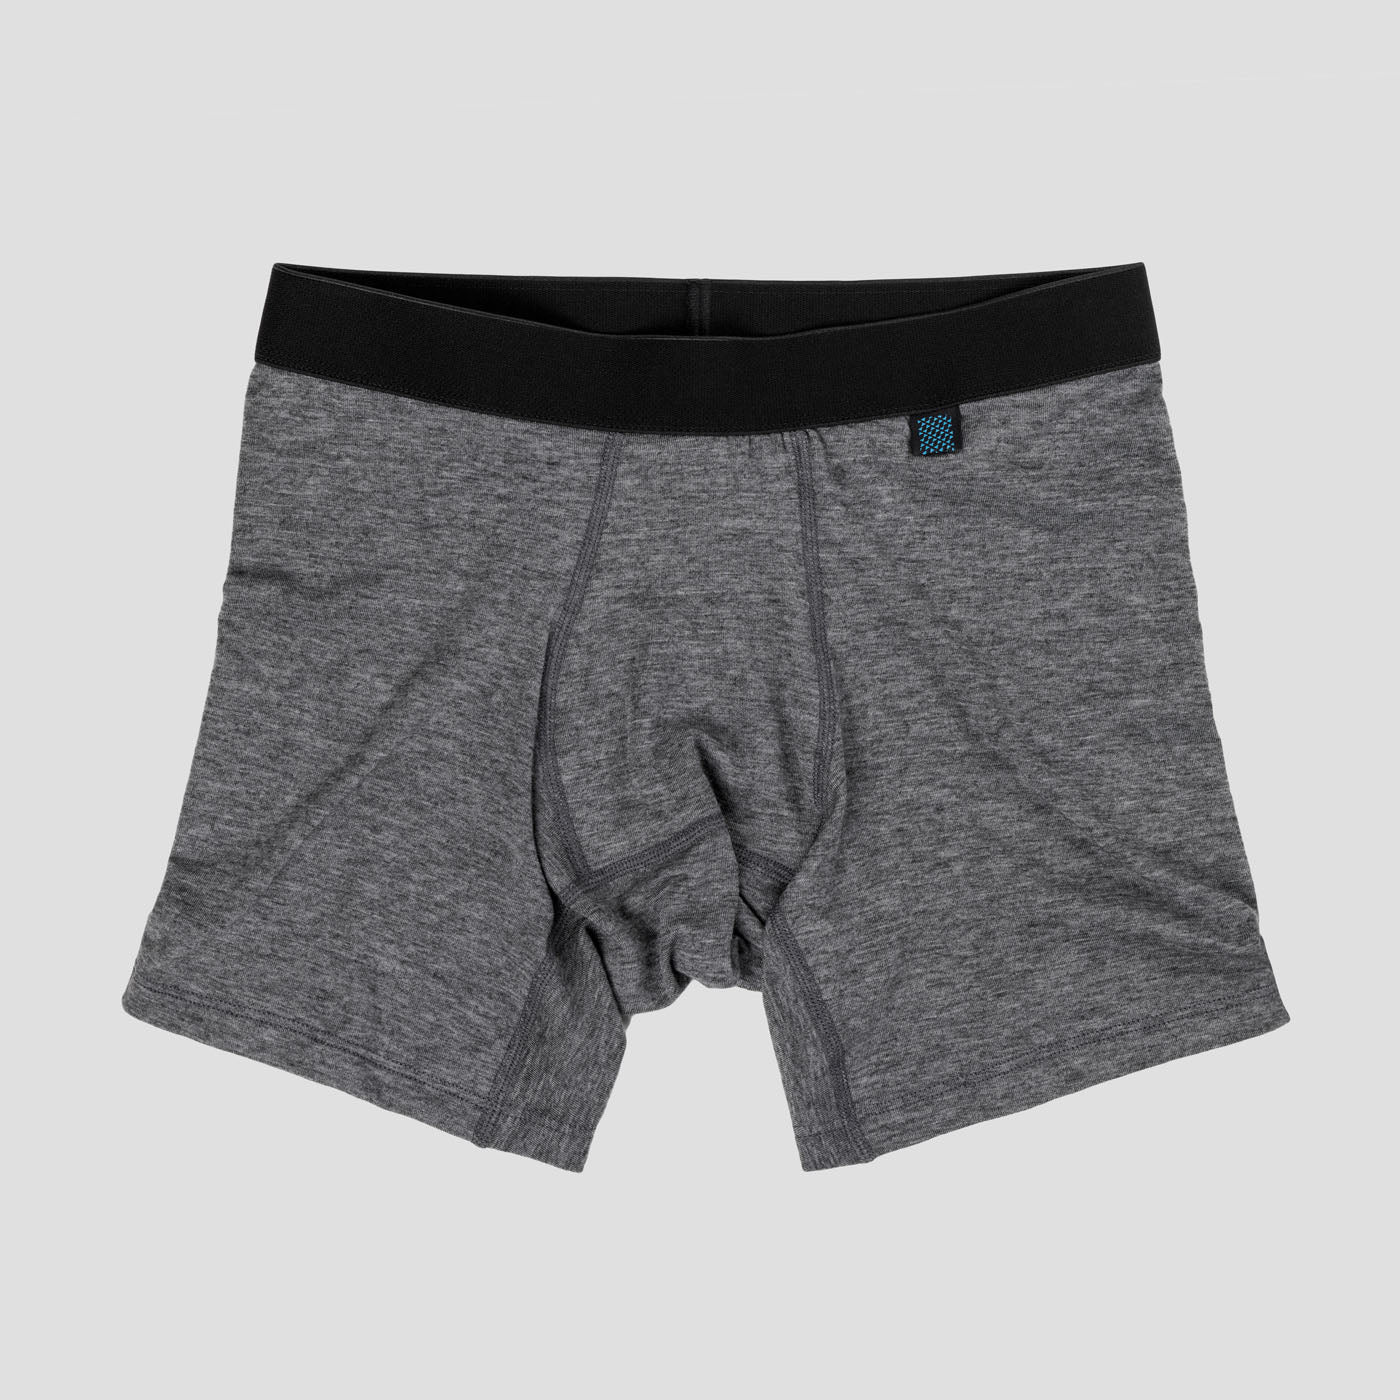 Men's Merino Boxer Briefs - Charcoal (Limited Sizes)